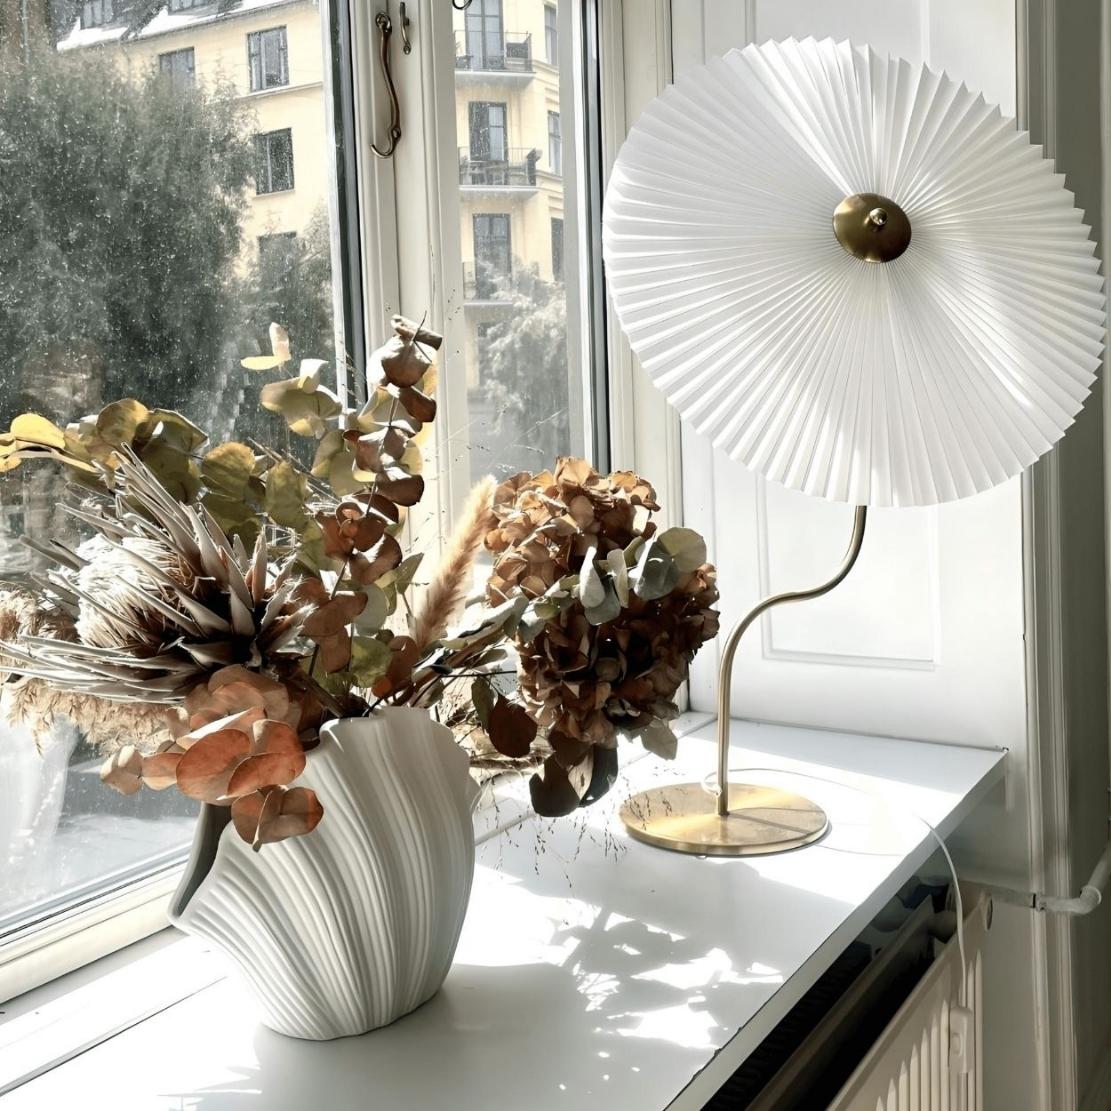 White ceramic shell vase with a dried flower bouquet and a white umbrella lamp